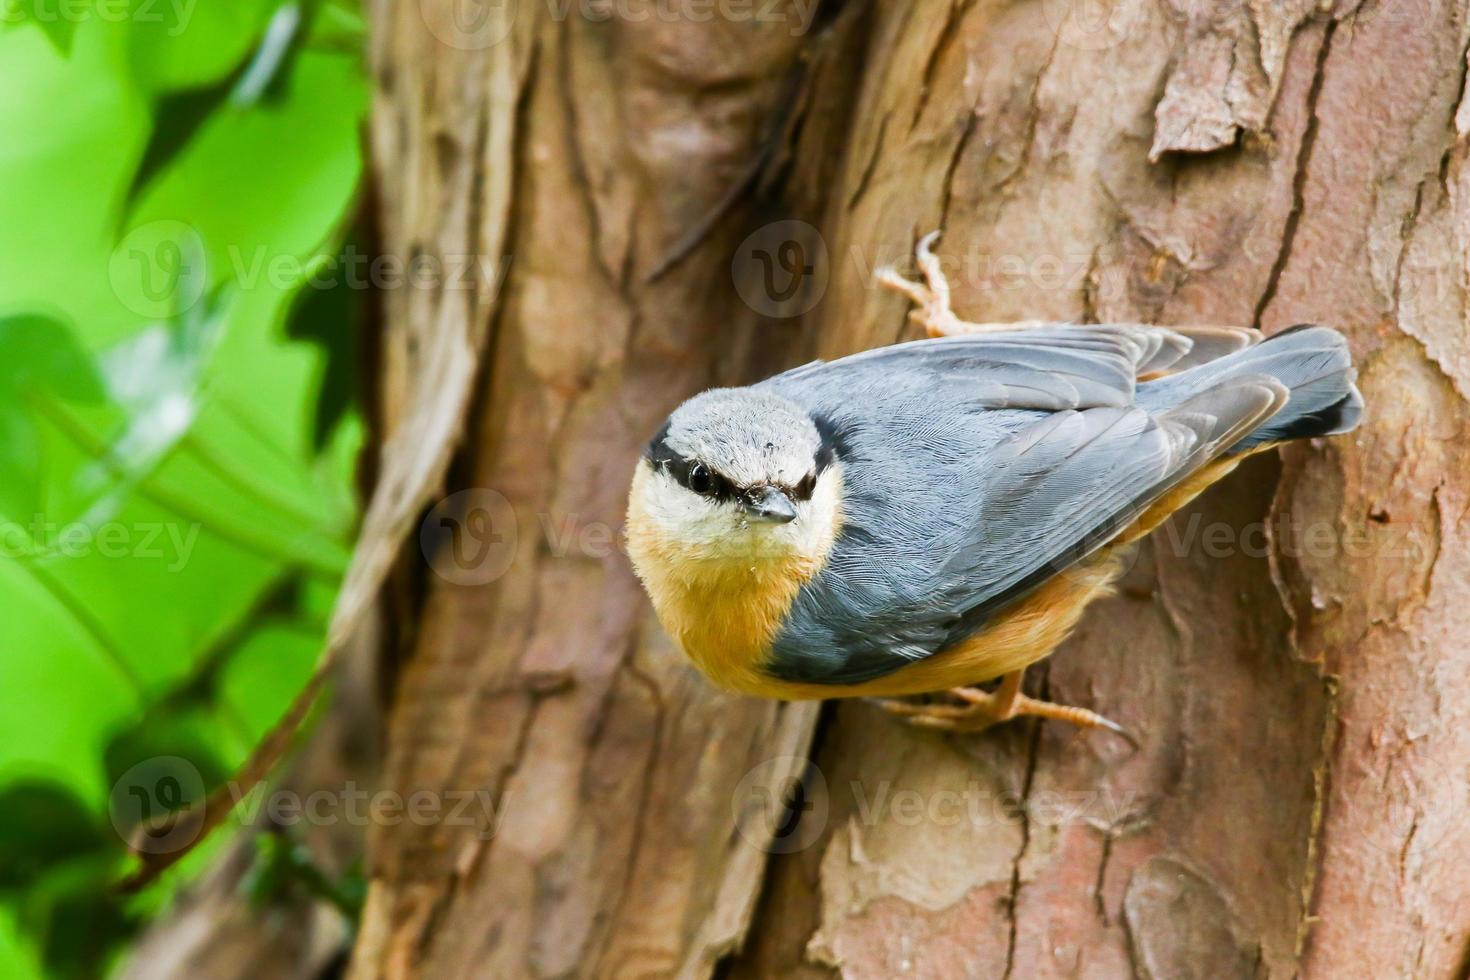 The Eurasian nuthatch or wood nuthatch, Sitta europaea, is a small passerine bird with blue back and orange lower part of body and a white head with black mask photo